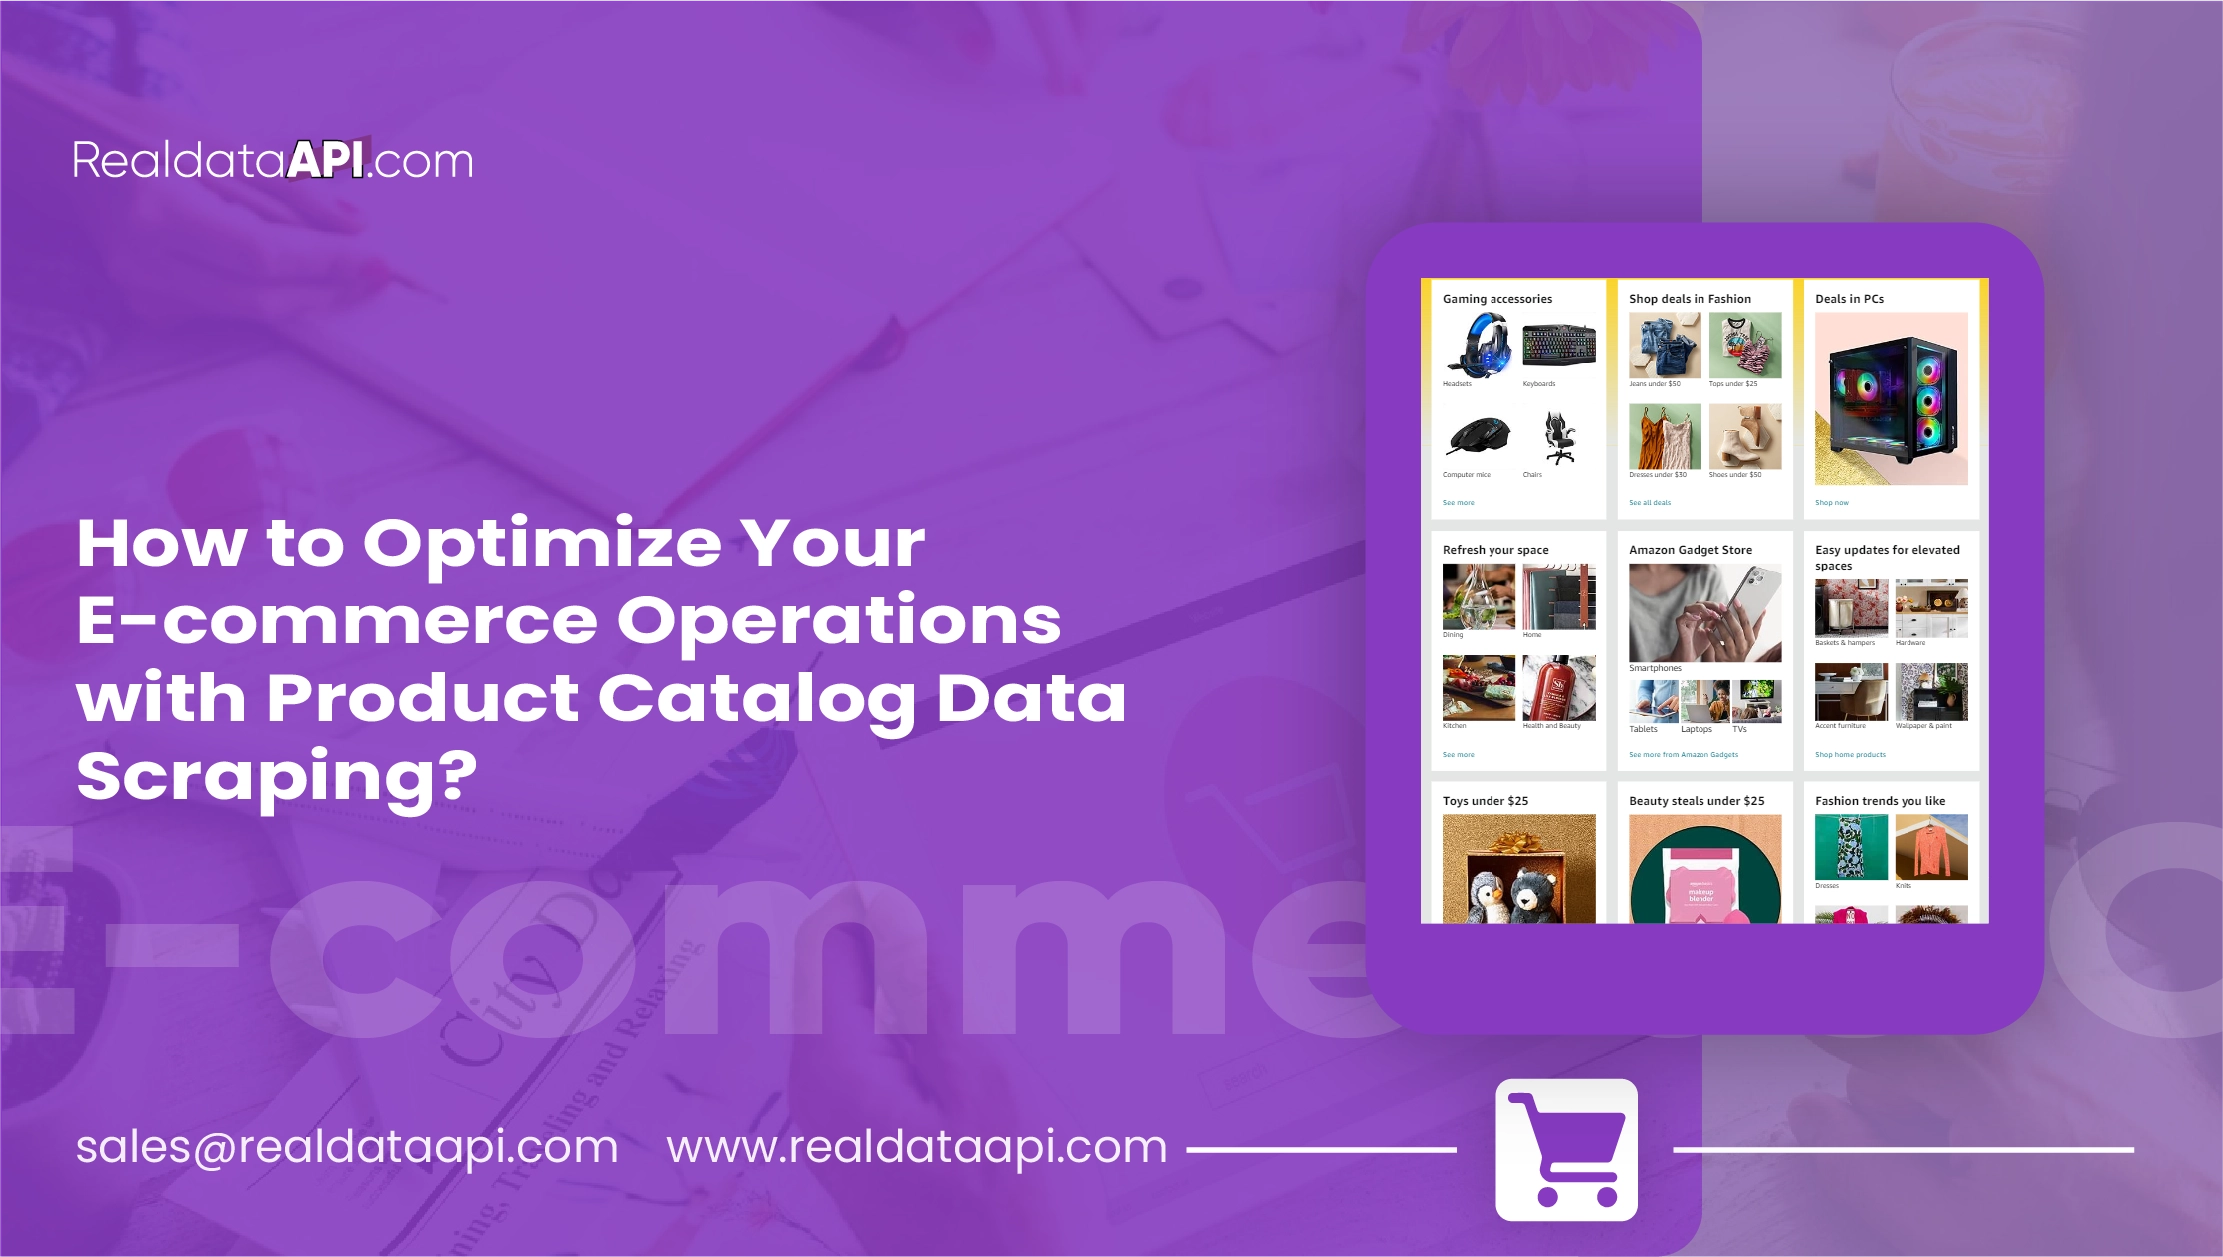 How-to-Optimize-Your-E-commerce-Operations-with-Product-Catalog-Data-Scraping